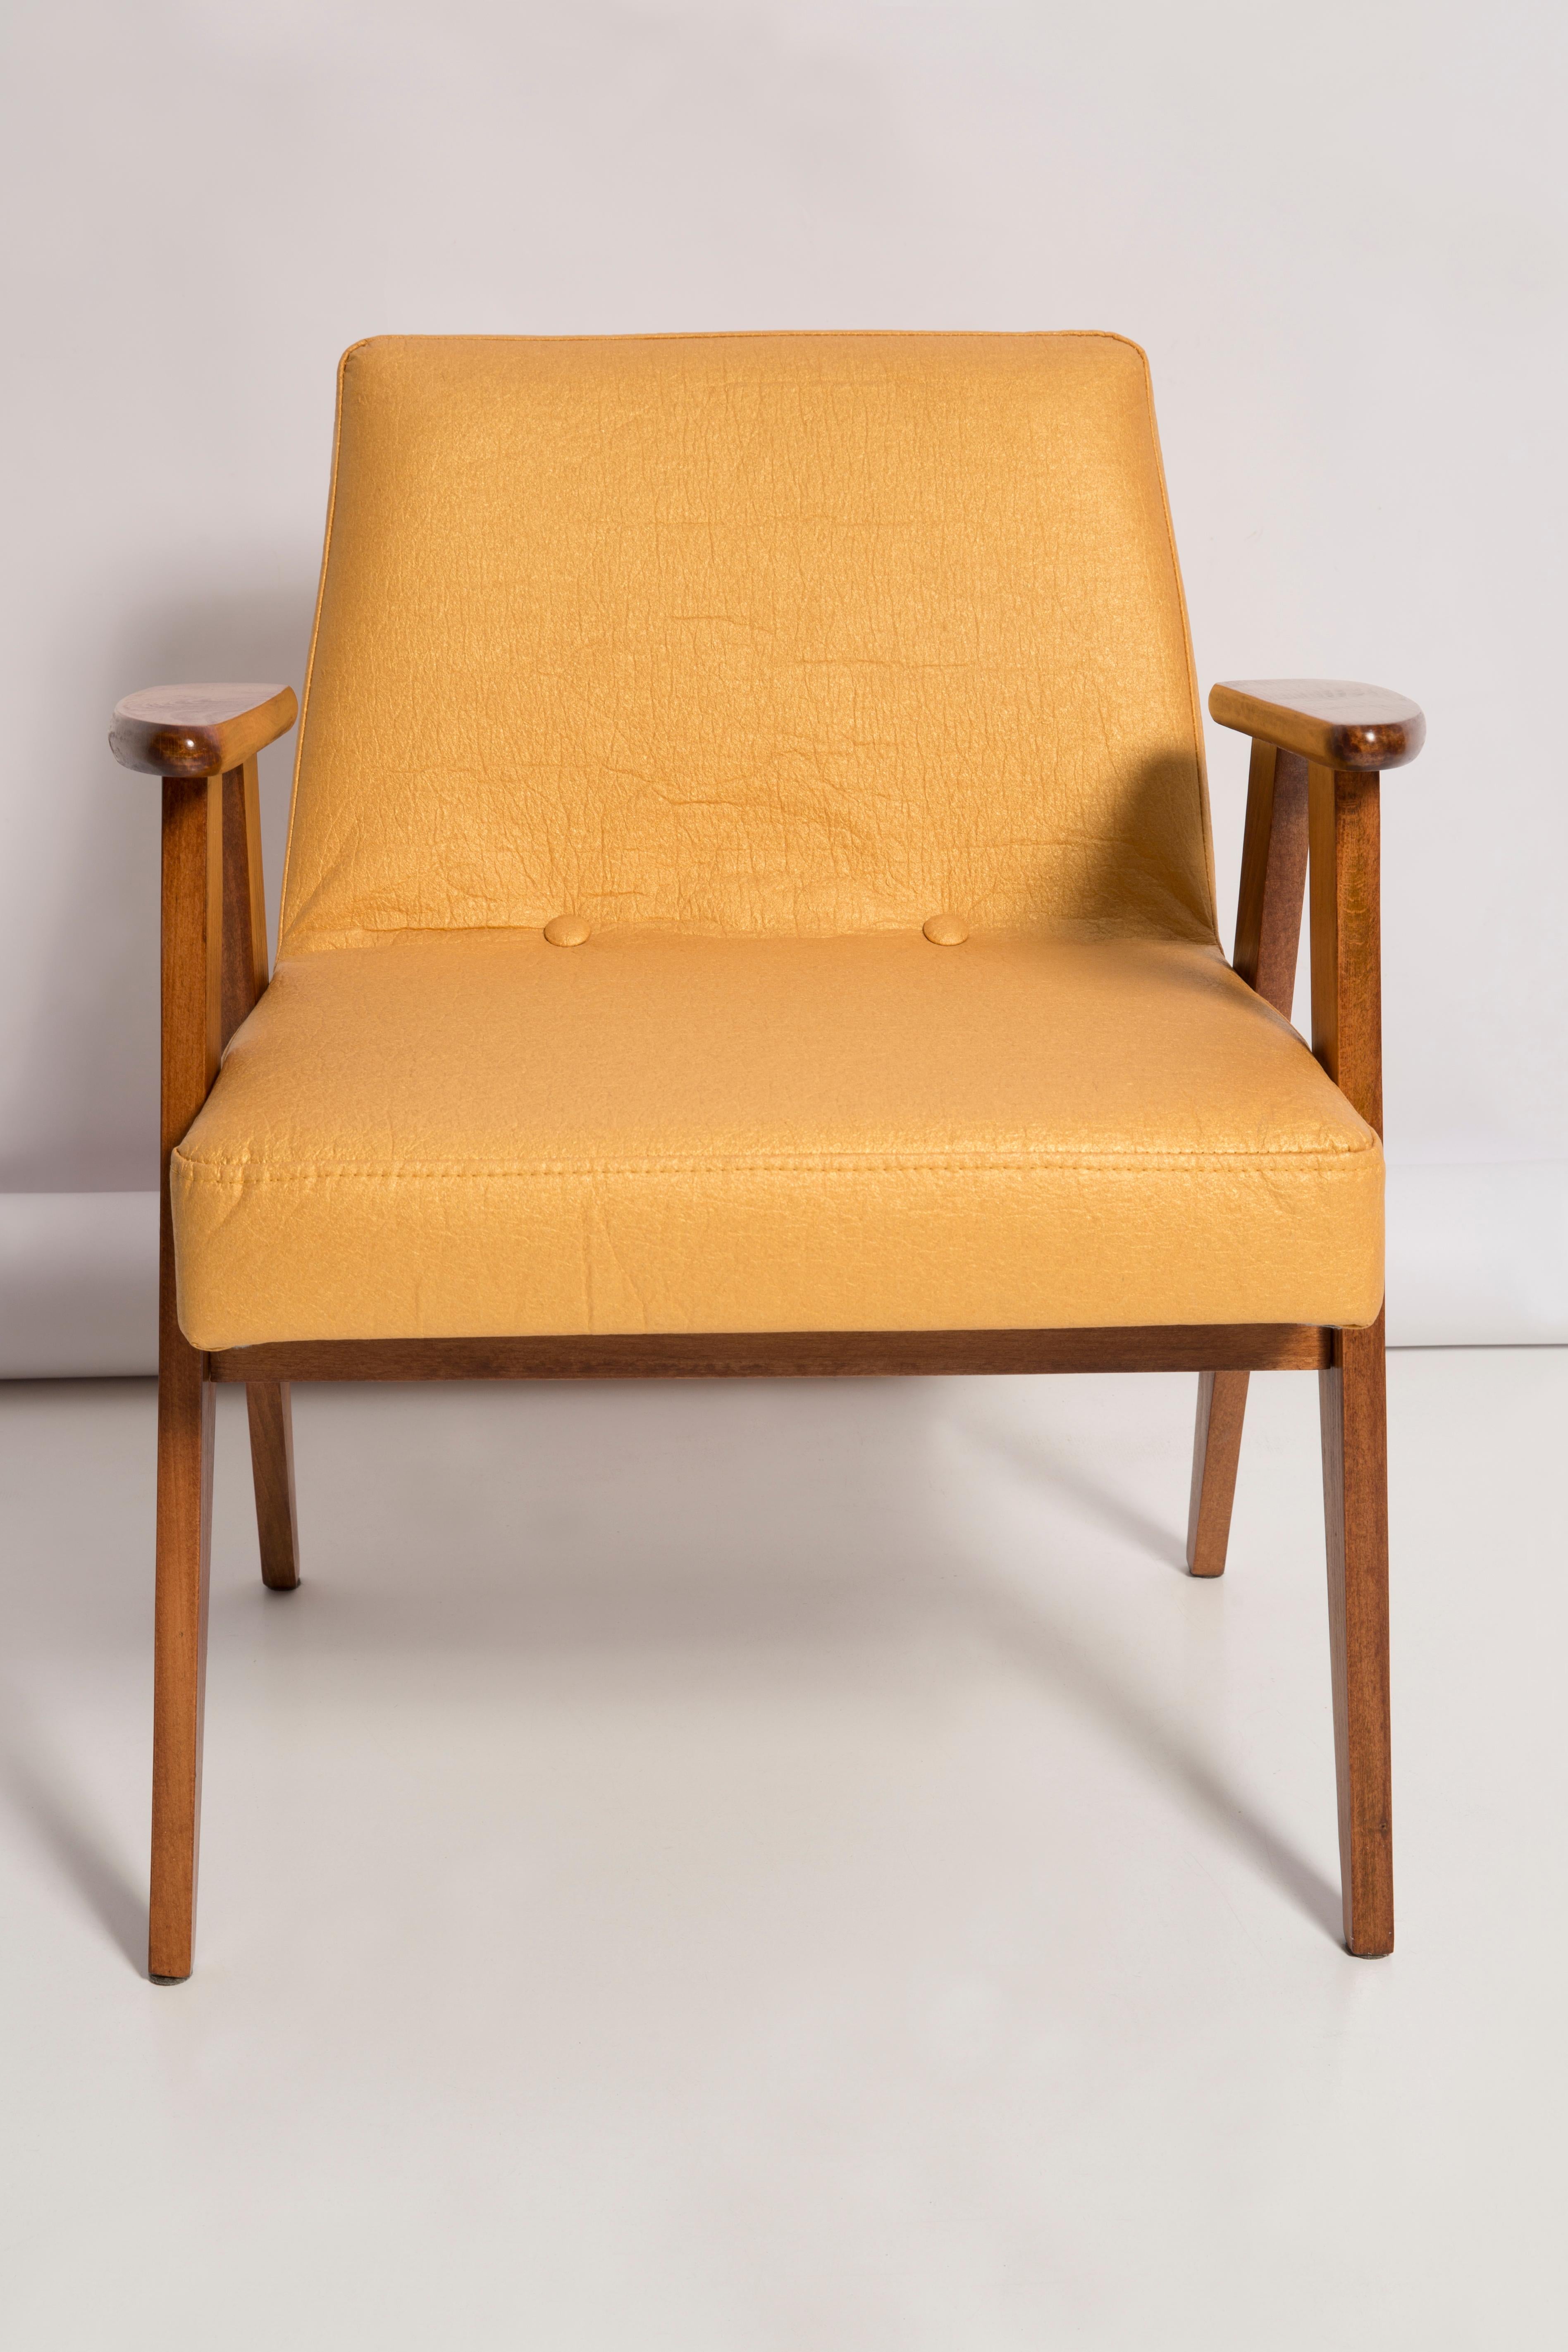 Two Midcentury 366 Club Armchairs in Pineapple Leather, Jozef Chierowski, 1960s For Sale 4